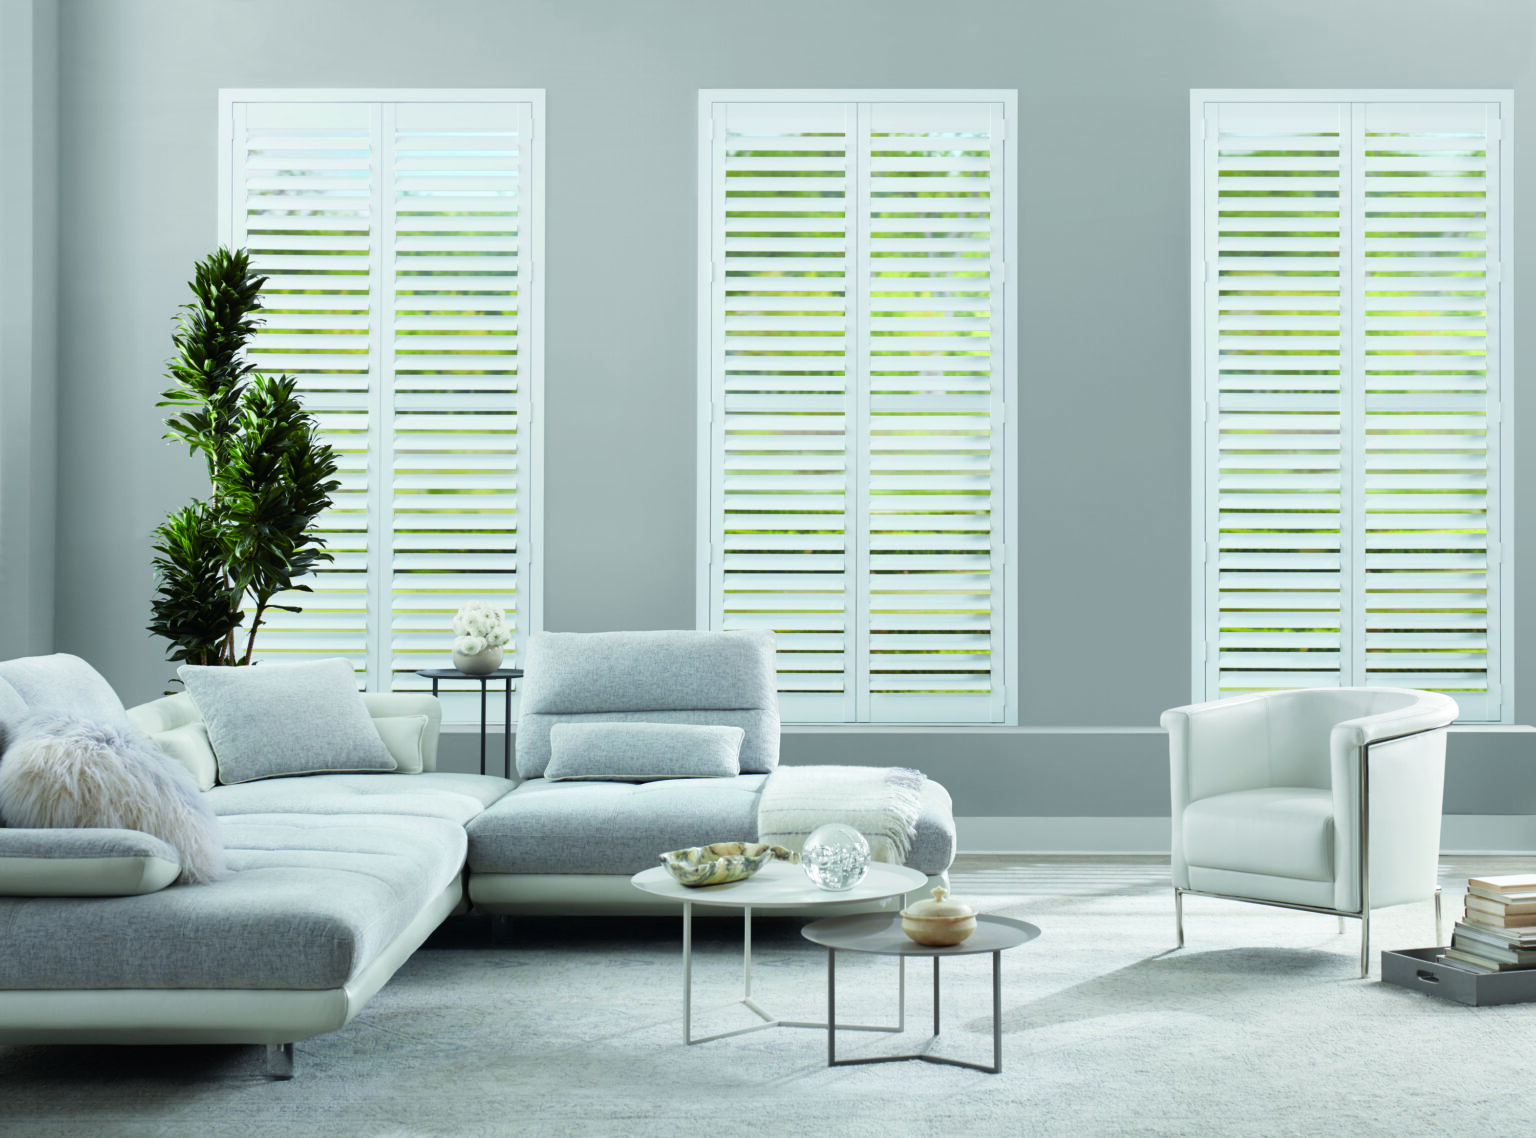 Shutters-timeless, versatile, personalize to meet your needs (5) (1)